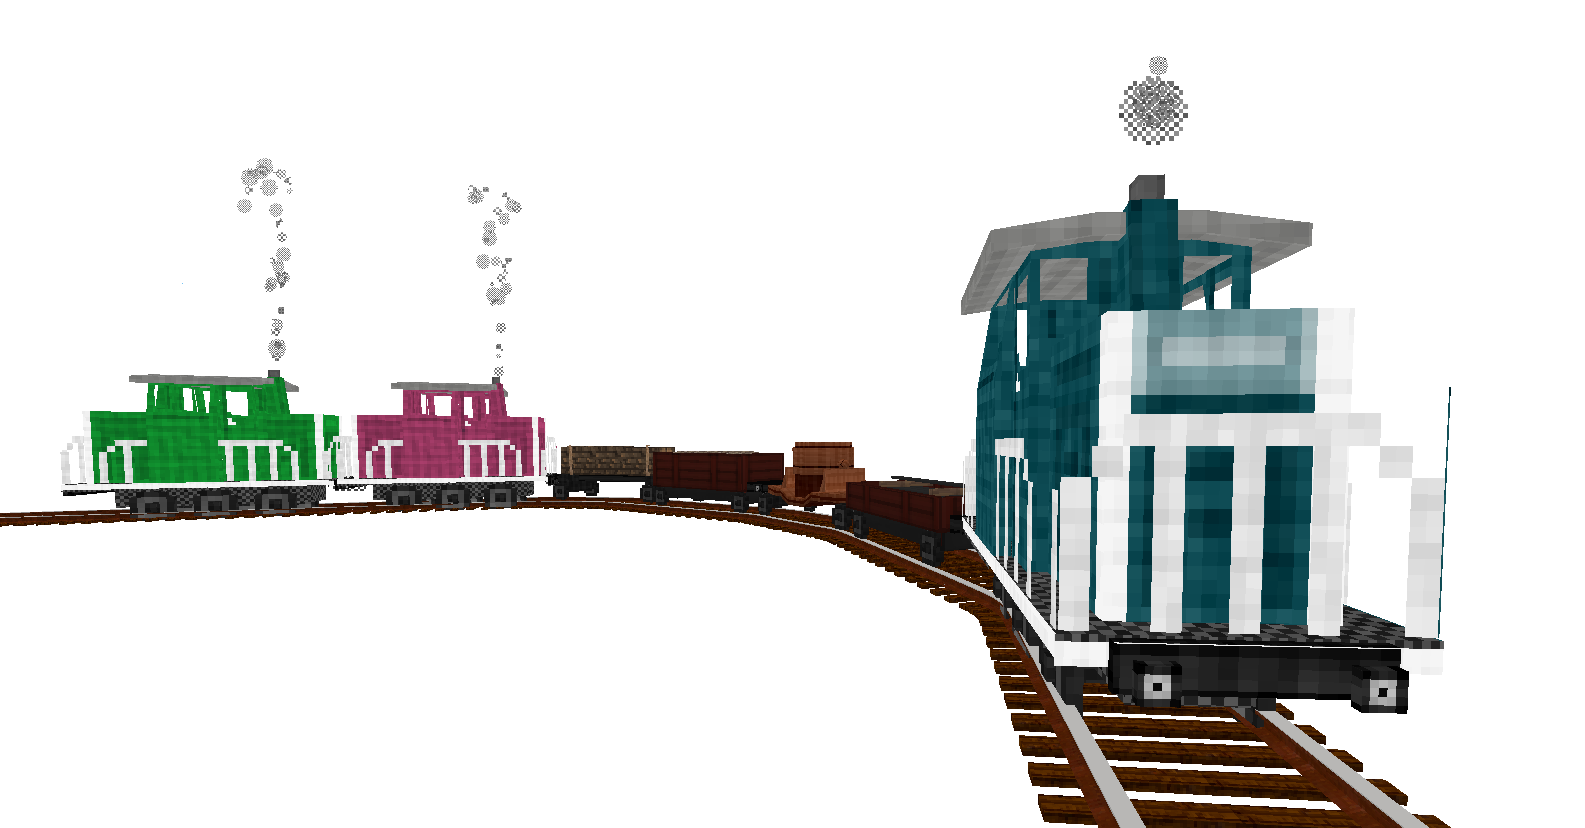 advtrains_freight_train.png